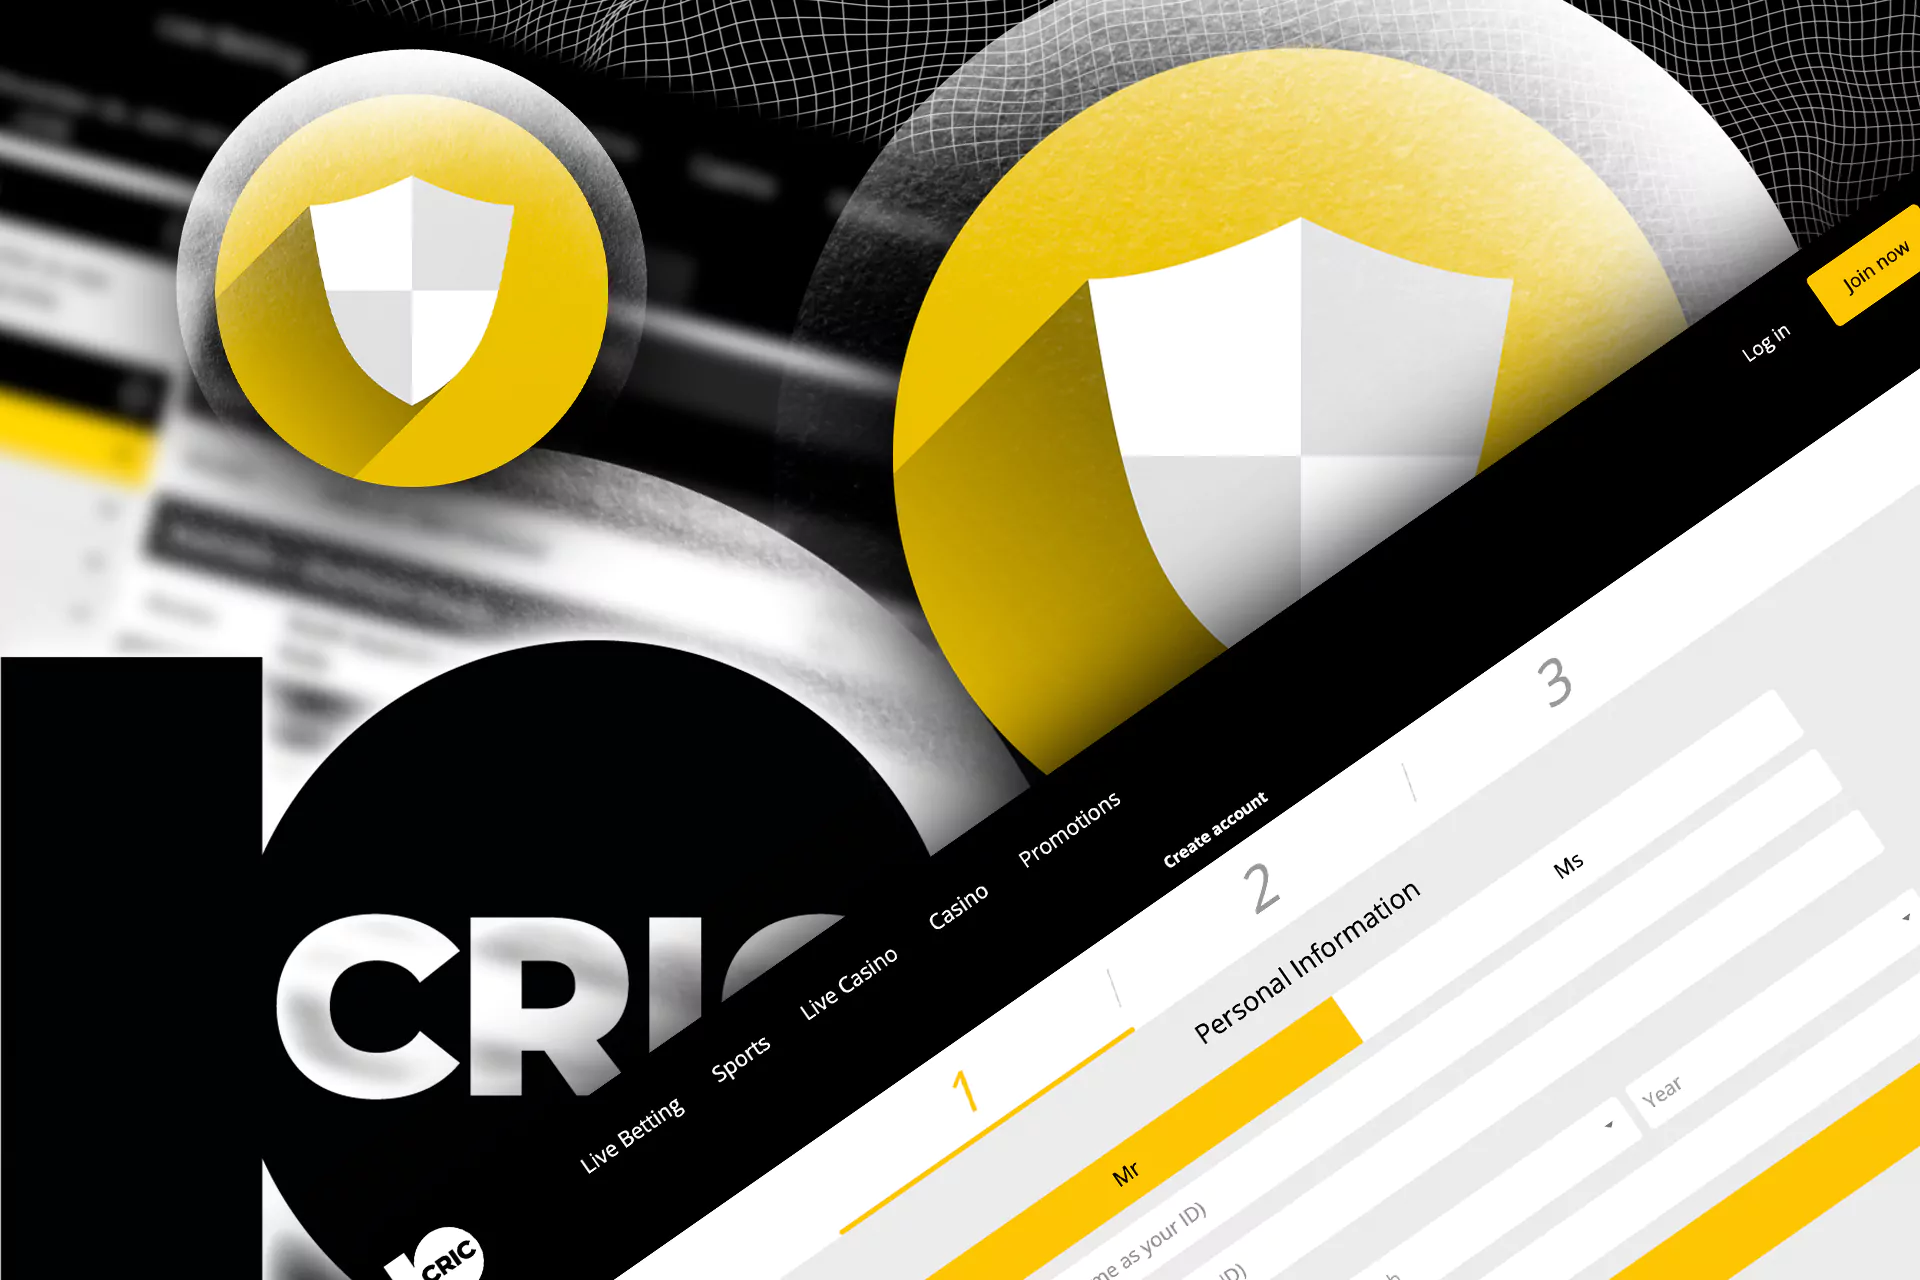 10Cric protects all the bettors' personal data.